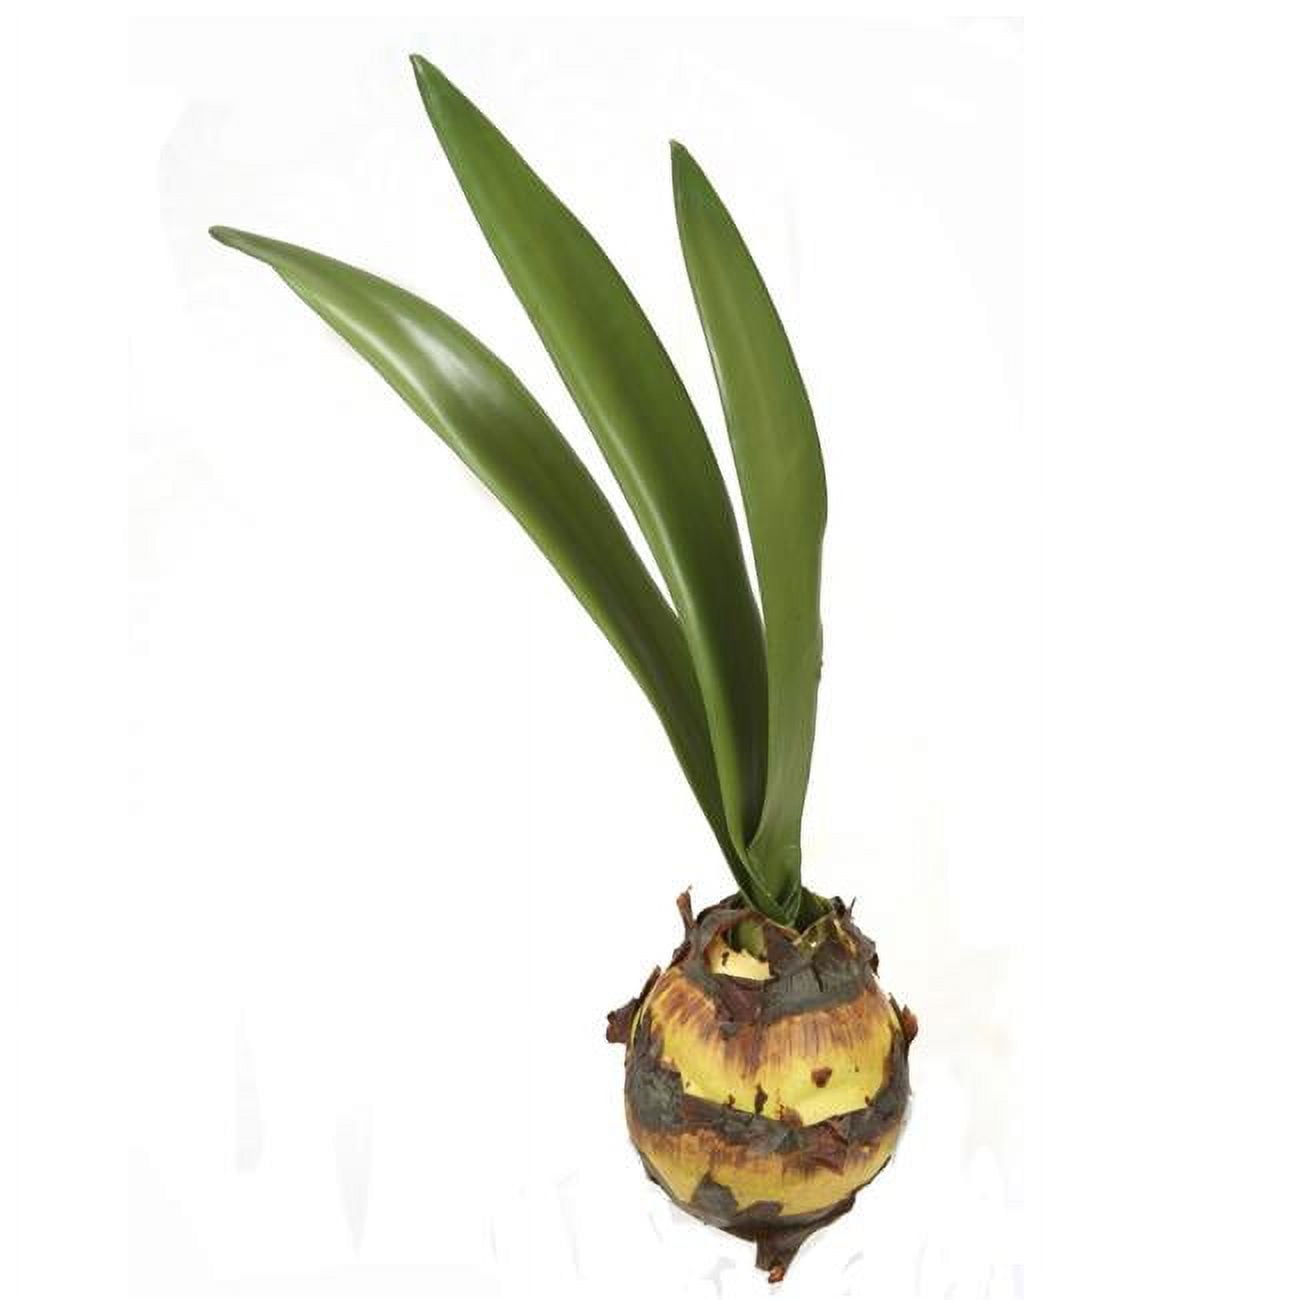 Picture of Disttive Designs DW-1018B Unisex Amaryllis Bulb with 3 Leaves